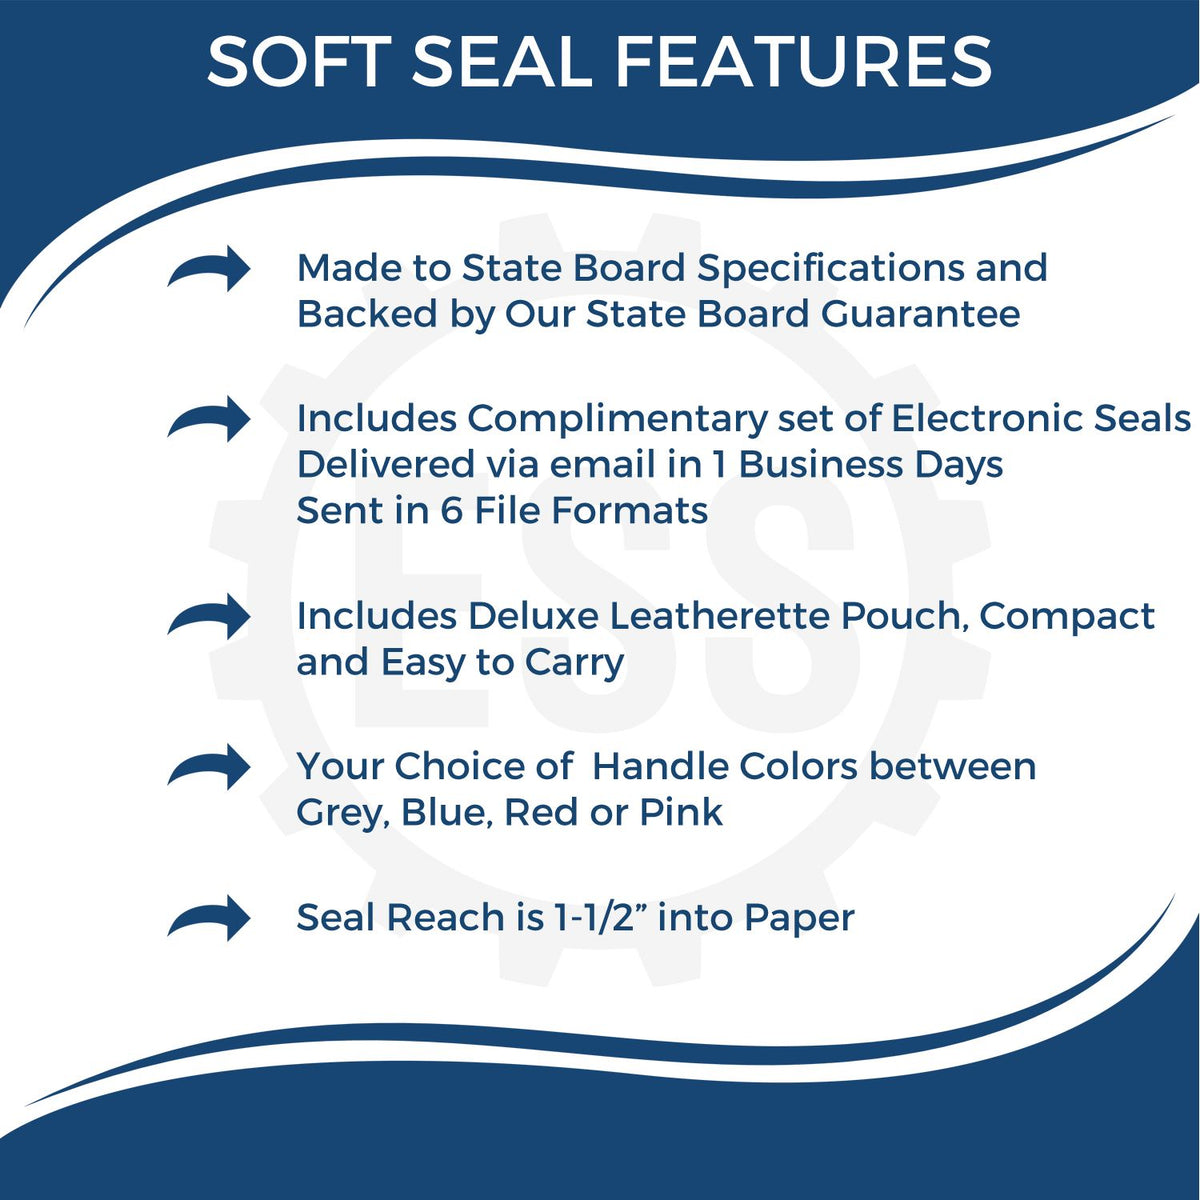 A picture of an infographic highlighting the selling points for the Soft Nevada Professional Engineer Seal